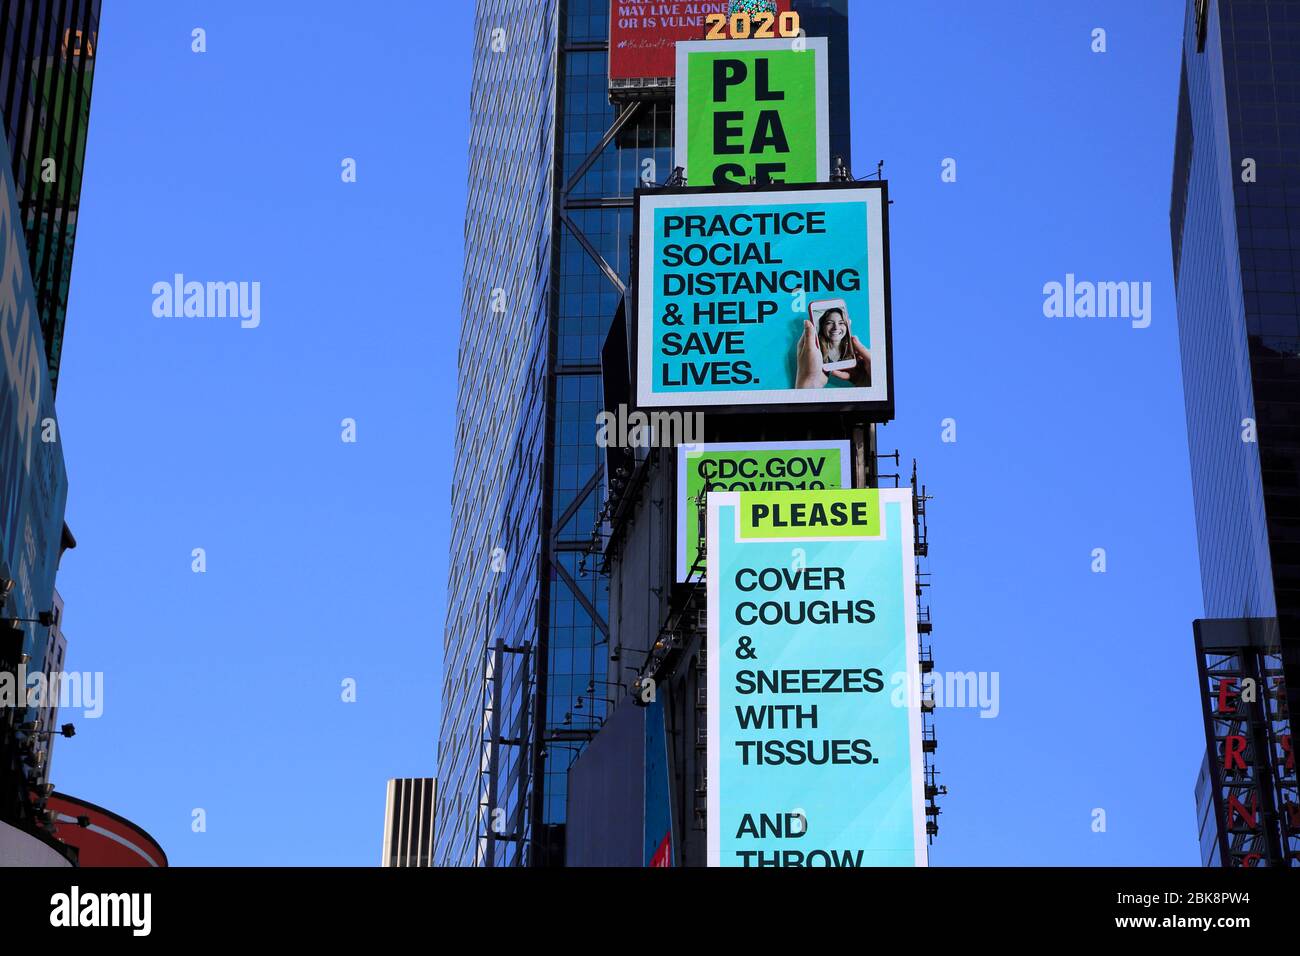 CDC billboard in the center of Times Square New York City displaying coronavirus prevention tips May 1, 2020 Stock Photo